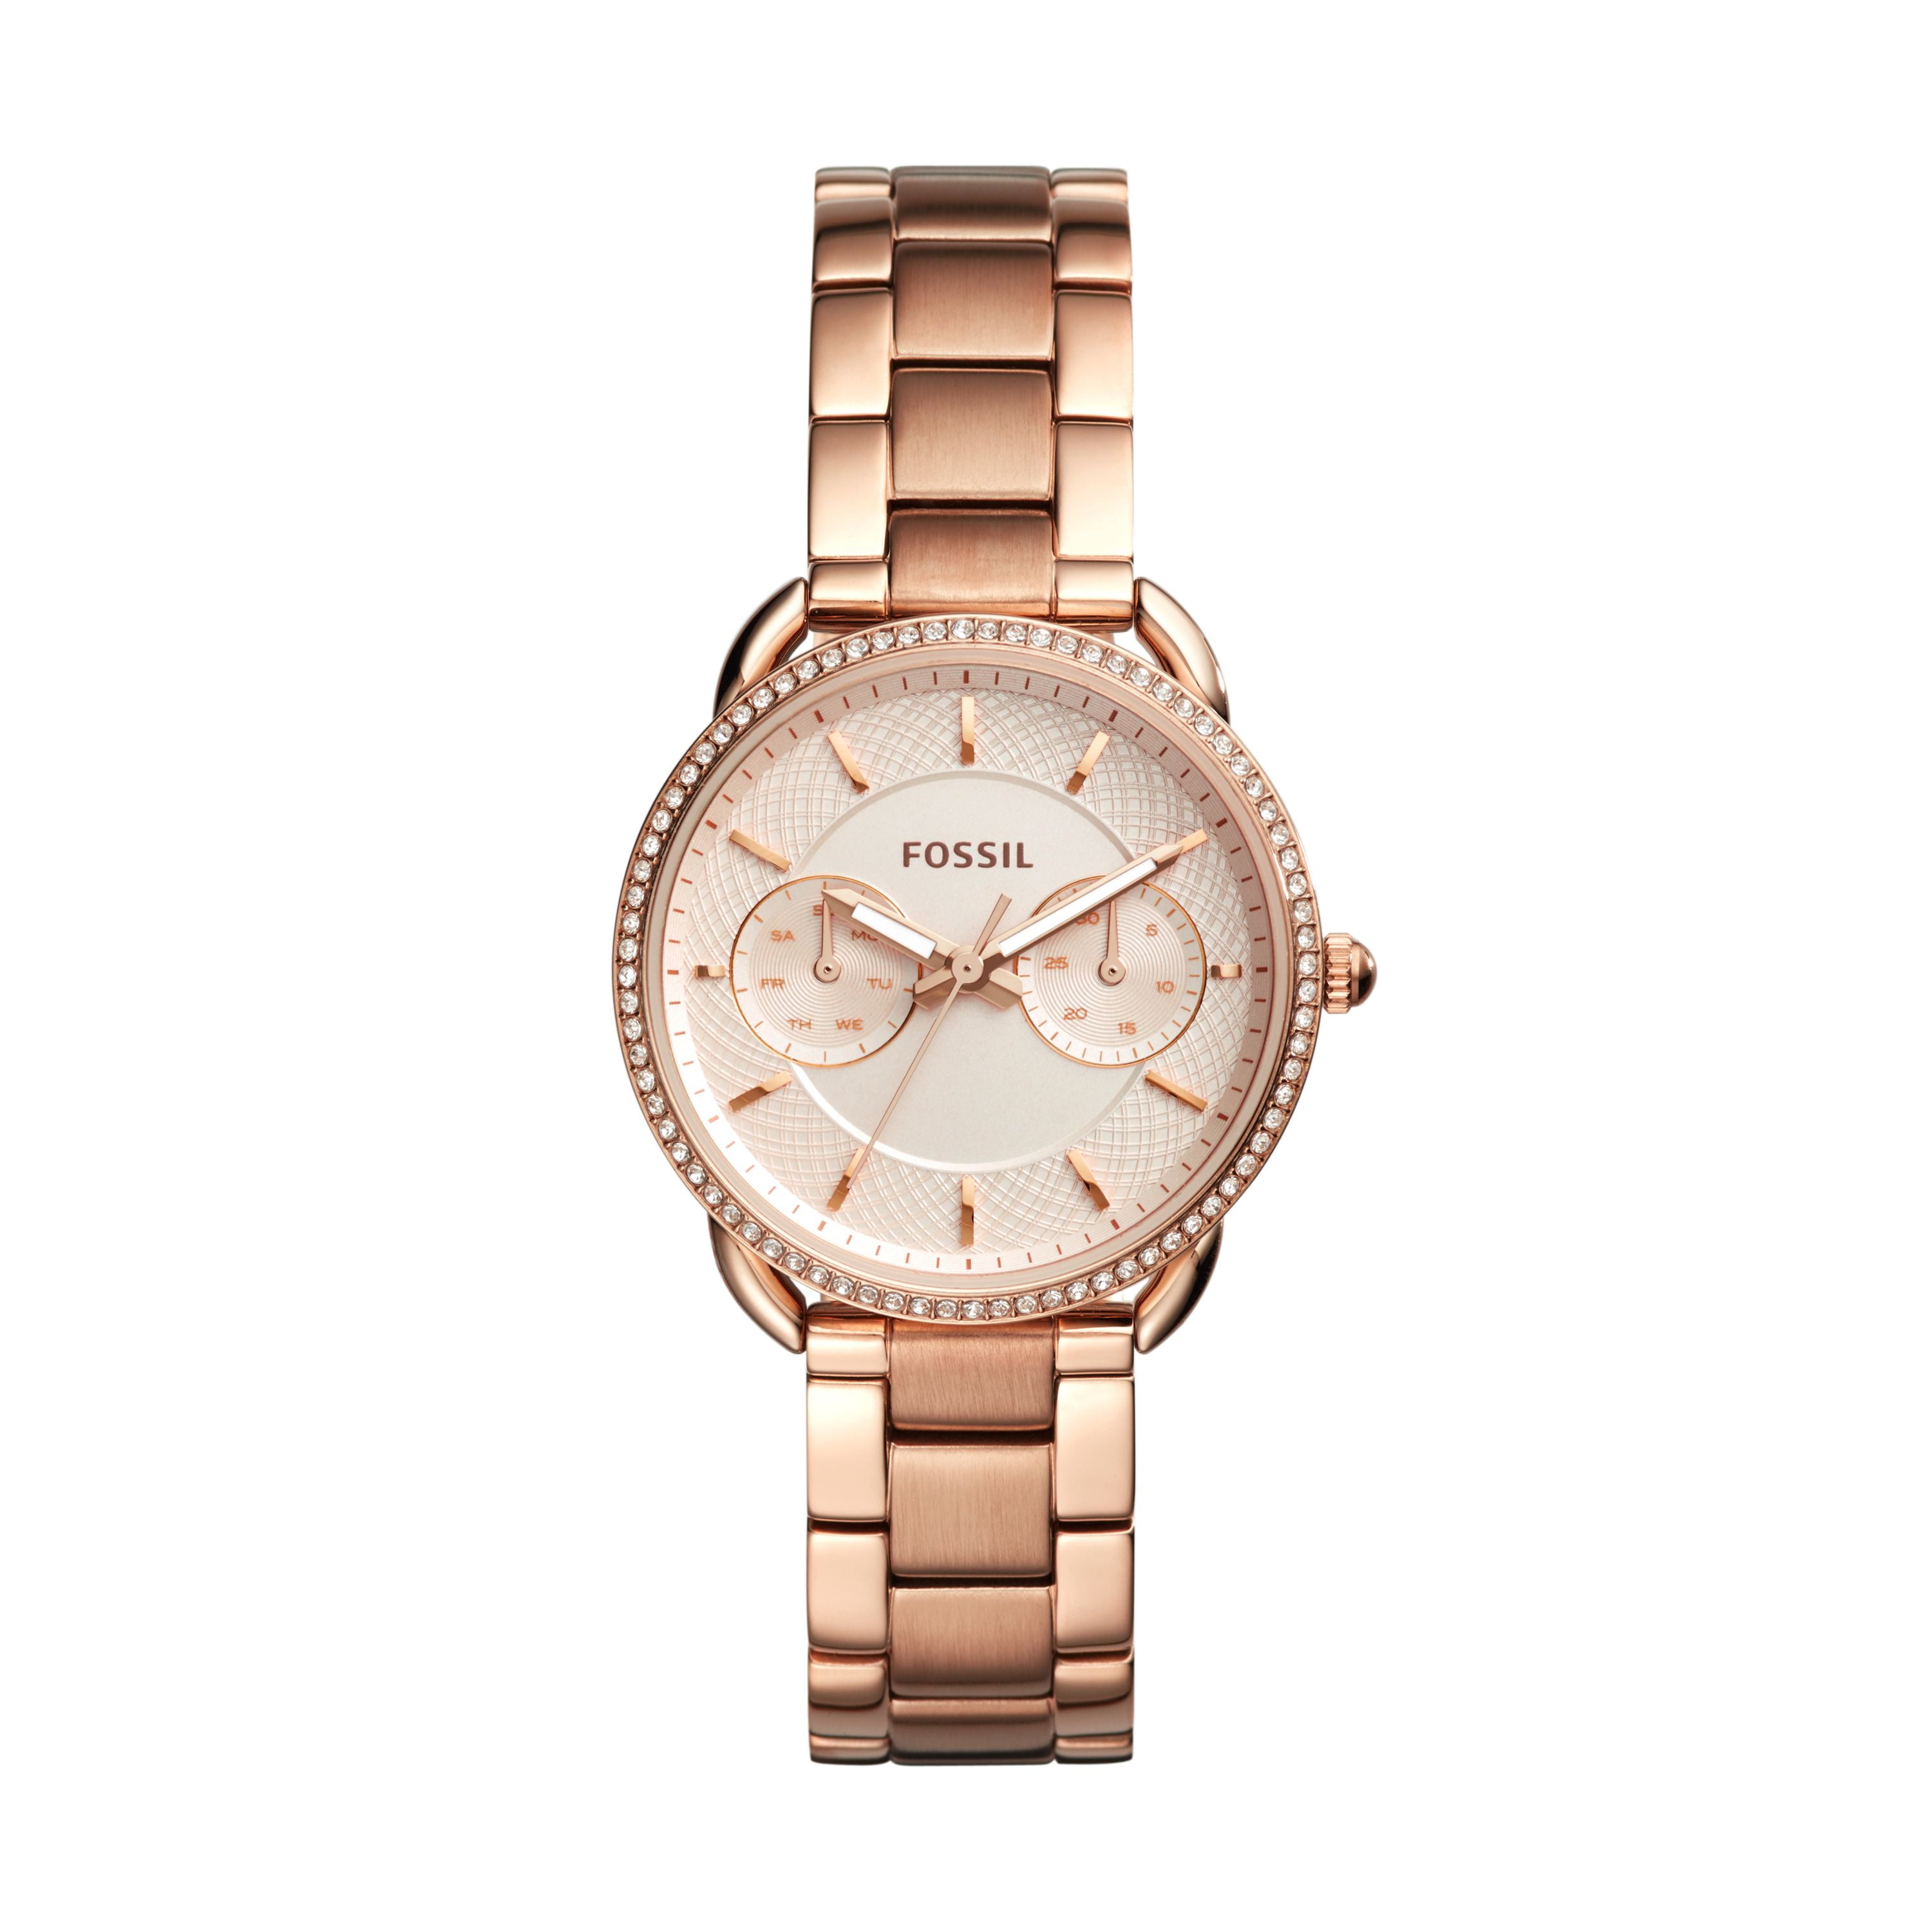 Fossil Women's Carlie Three-Hand Rose Gold Stainless Steel Watch ES4301